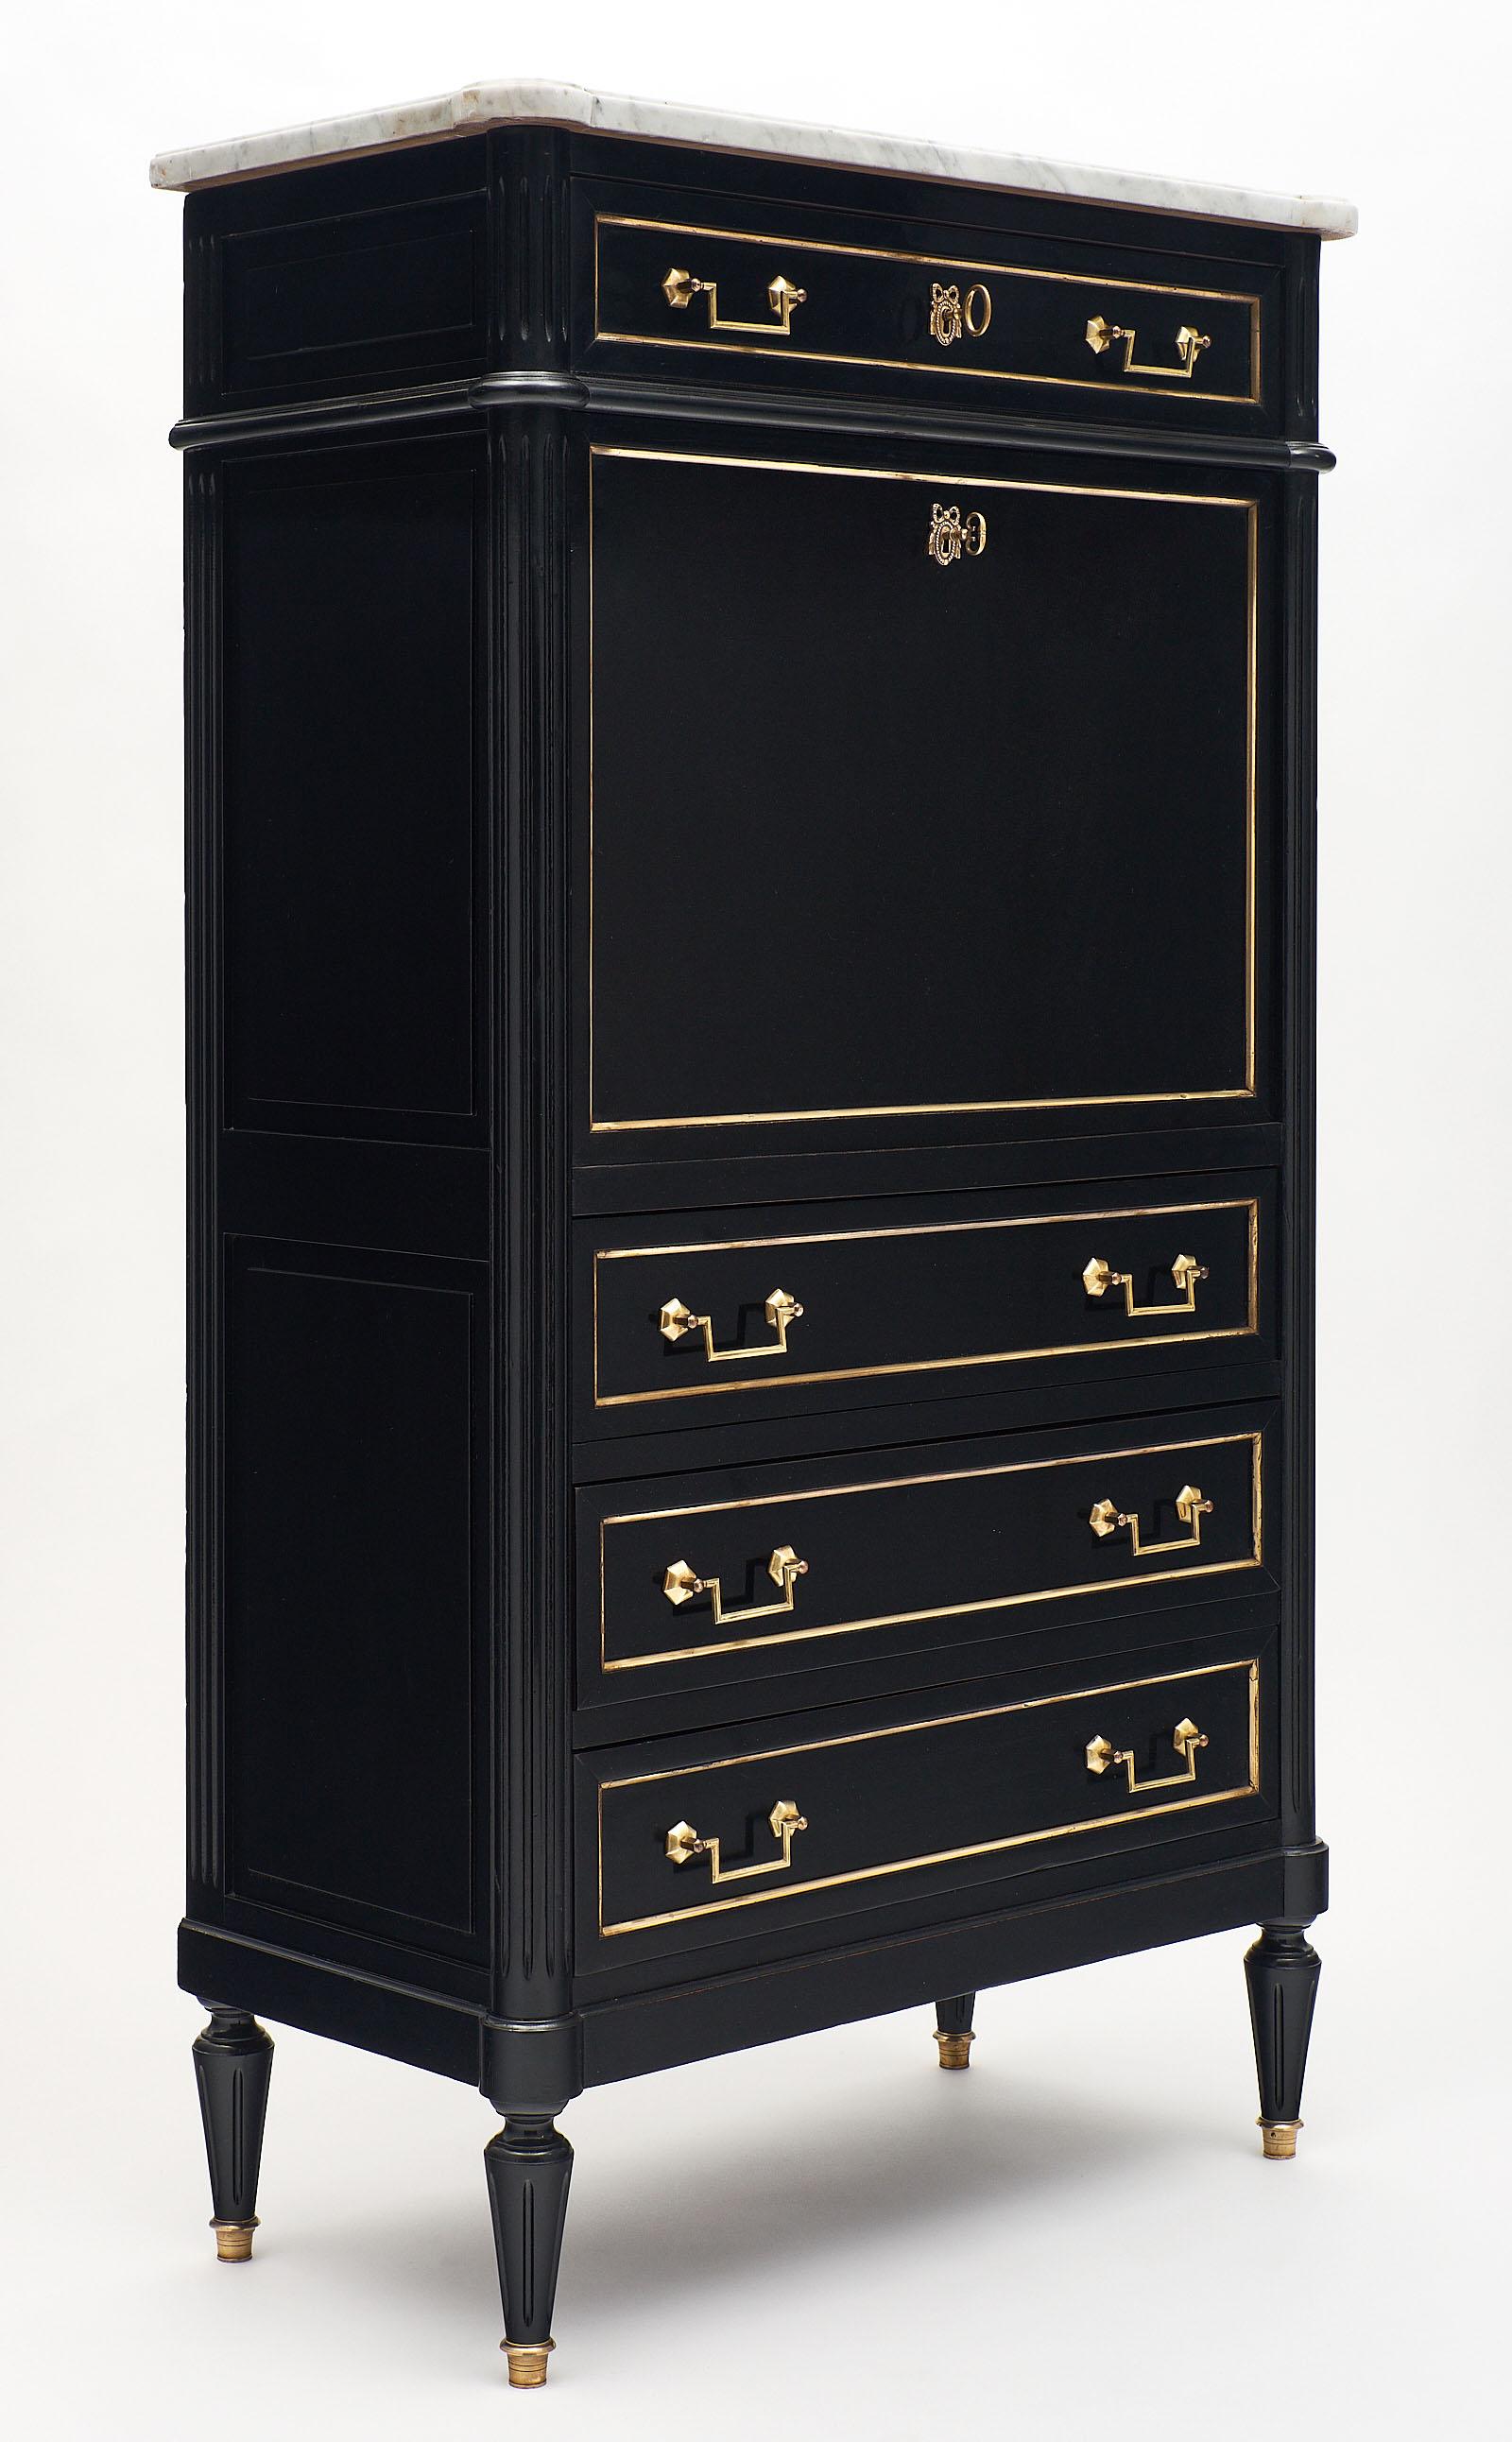 Antique Louis XVI Style French Secrétaire made of mahogany and finished with a lustrous ebony French polish. We love the Carrara marble top and original brass hardware and trim. There are four dovetailed drawers, the top of which locks. The interior